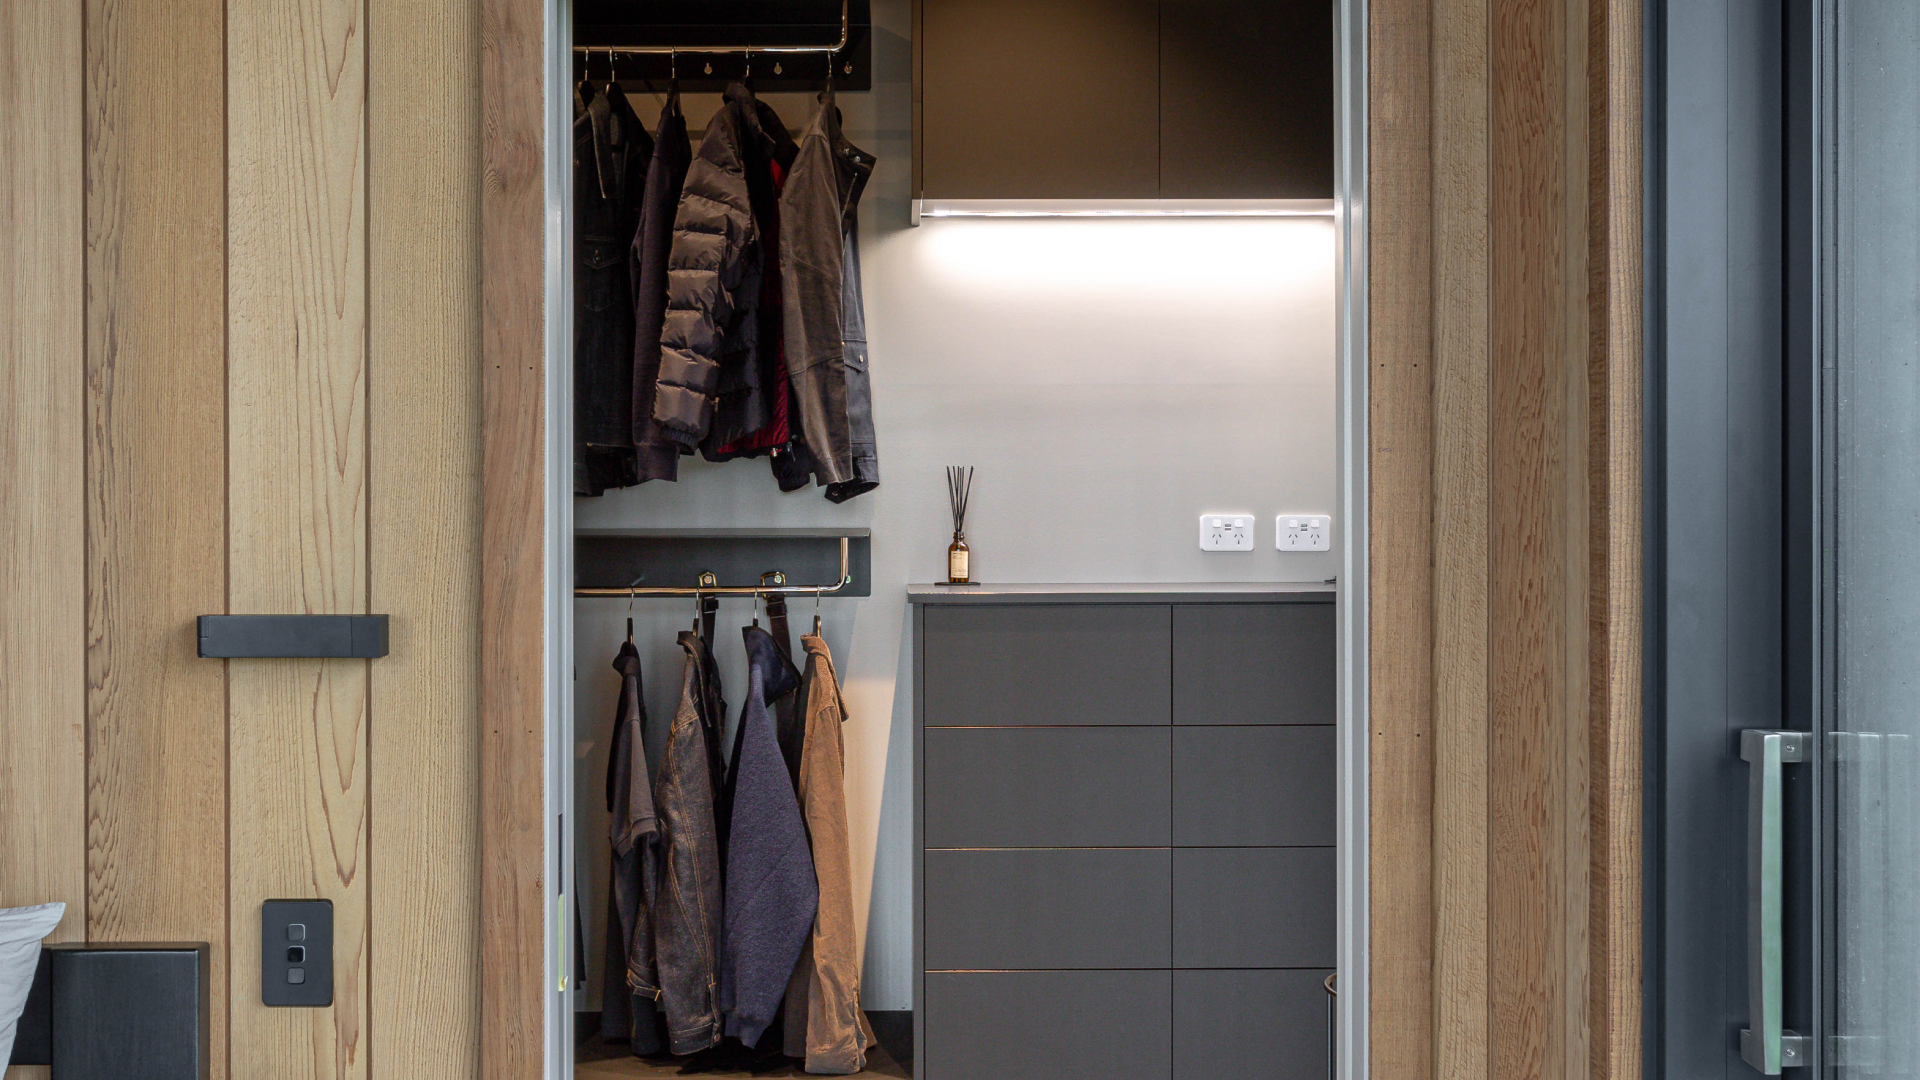 A walk-in wardrobe with built-in shelving featuring dark grey cabinets and a hanging area for clothes. The closet is viewed from a bedroom with wood-paneled walls and terrazzo flooring, creating a sleek and modern aesthetic.